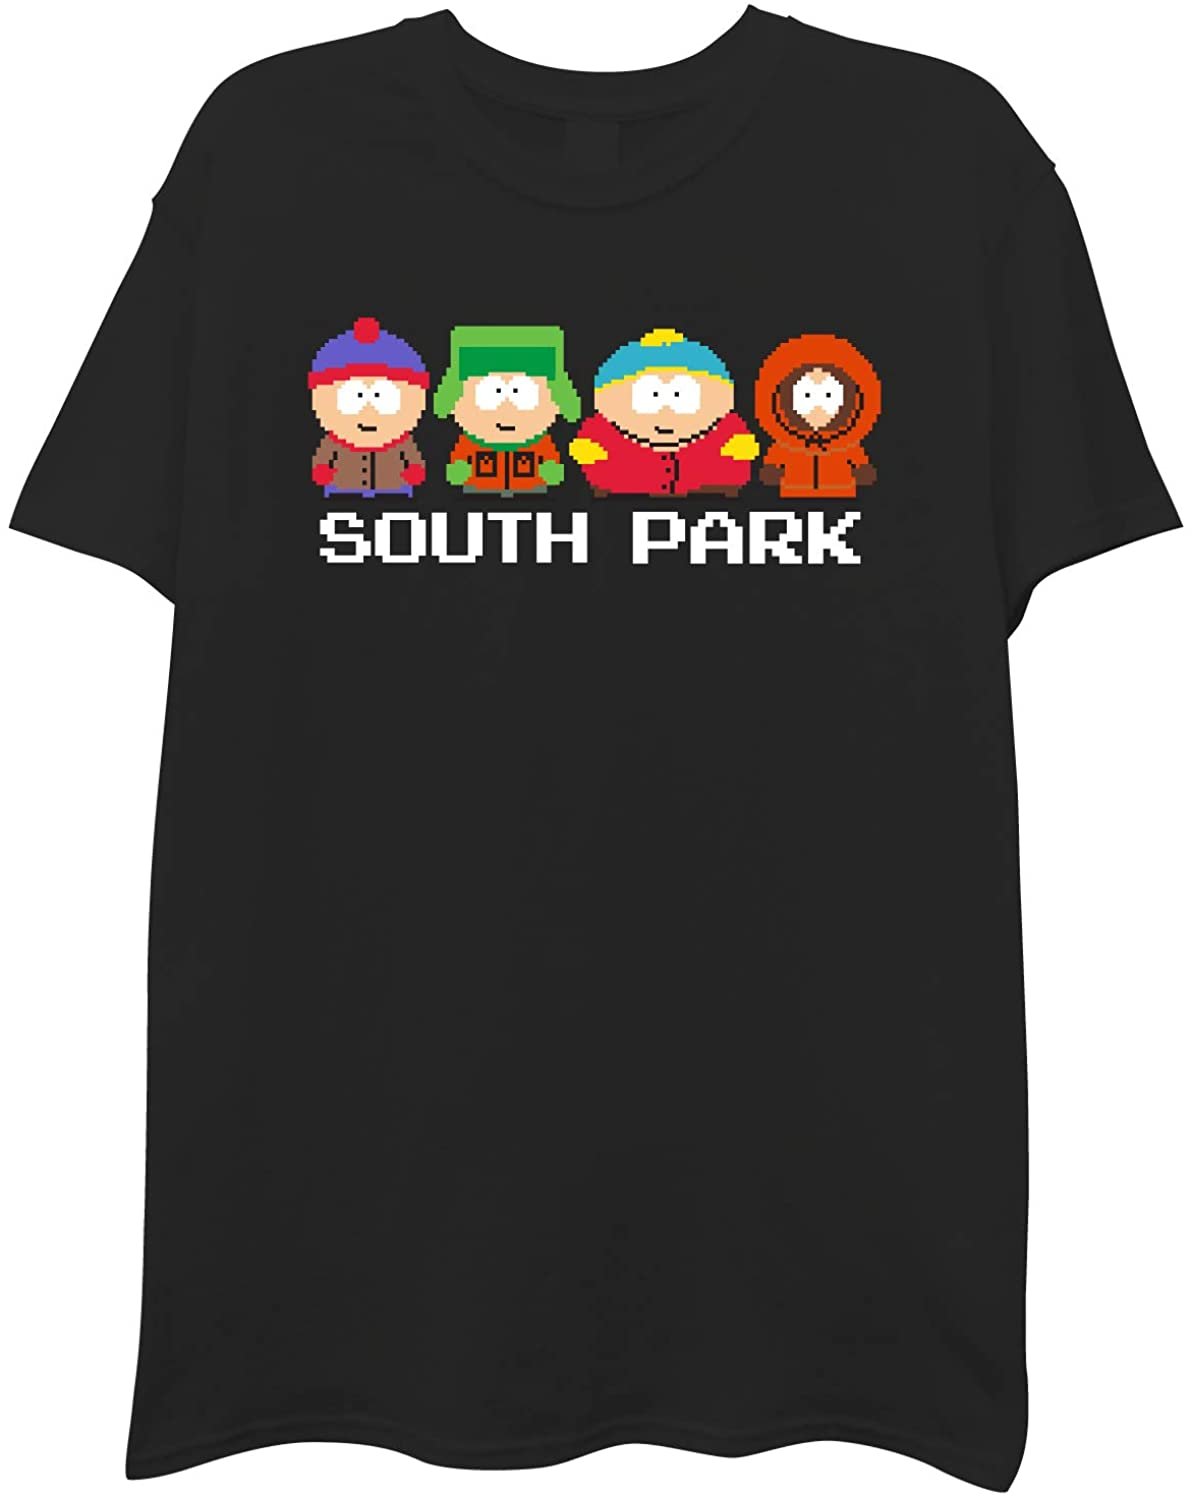 South Park Characters Mens Short Sleeve T-Shirt - Kenny, Cartman, Kyle & Stan - Comedy Central Tv Tee